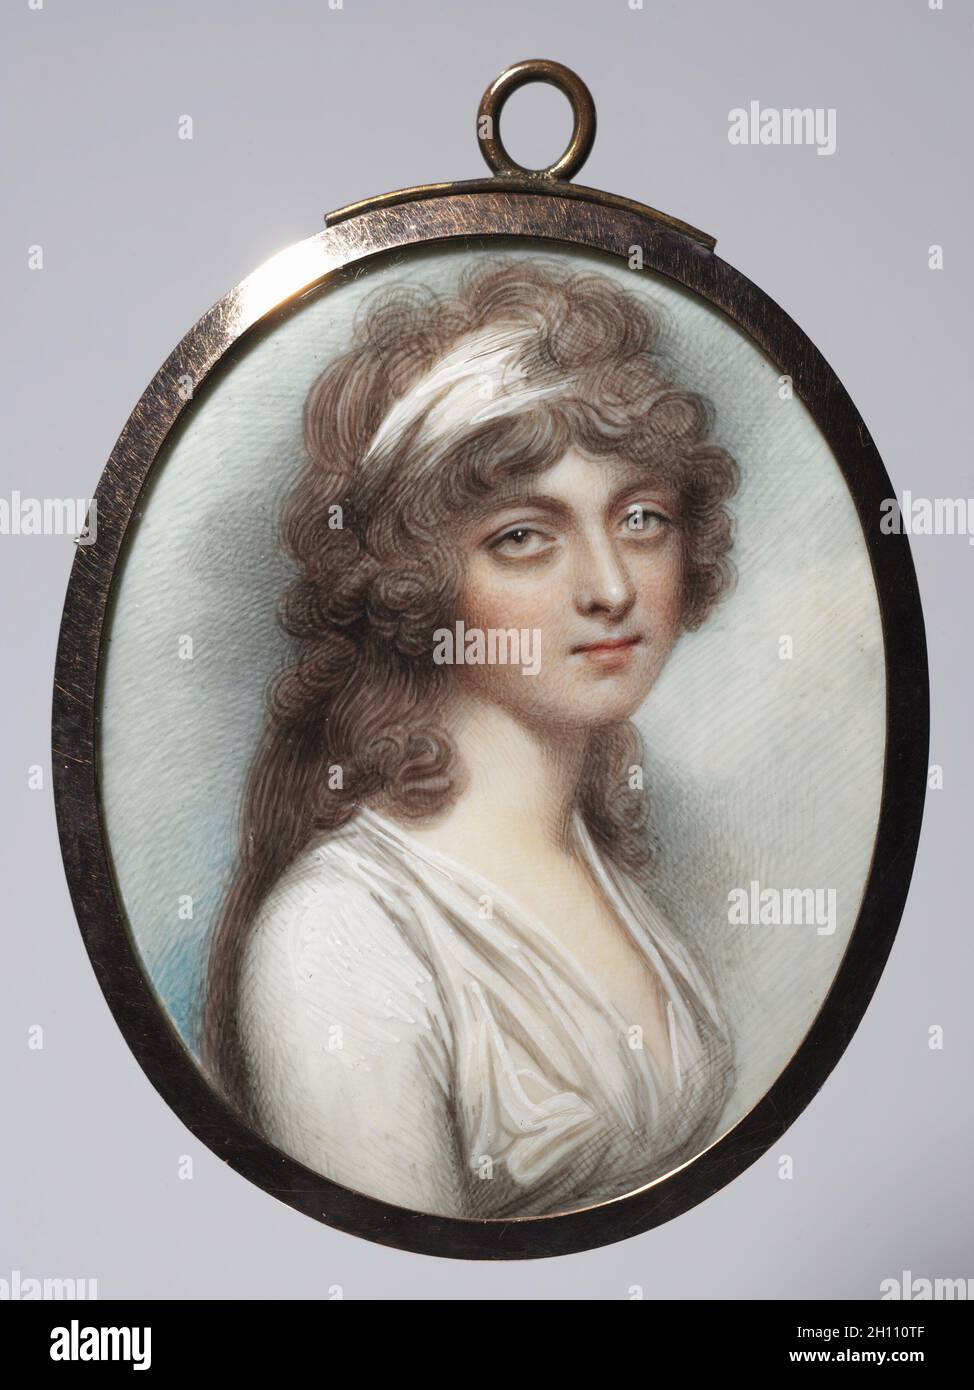 Portrait of Anna Walmesley, 1795. Andrew Plimer (British, 1763-1837). Watercolor on ivory in a gold frame with hair reverse; image: 6.4 x 5.6 cm (2 1/2 x 2 3/16 in.); framed: 7.5 x 6 cm (2 15/16 x 2 3/8 in.); sight: 6.7 x 5.4 cm (2 5/8 x 2 1/8 in.). Stock Photo